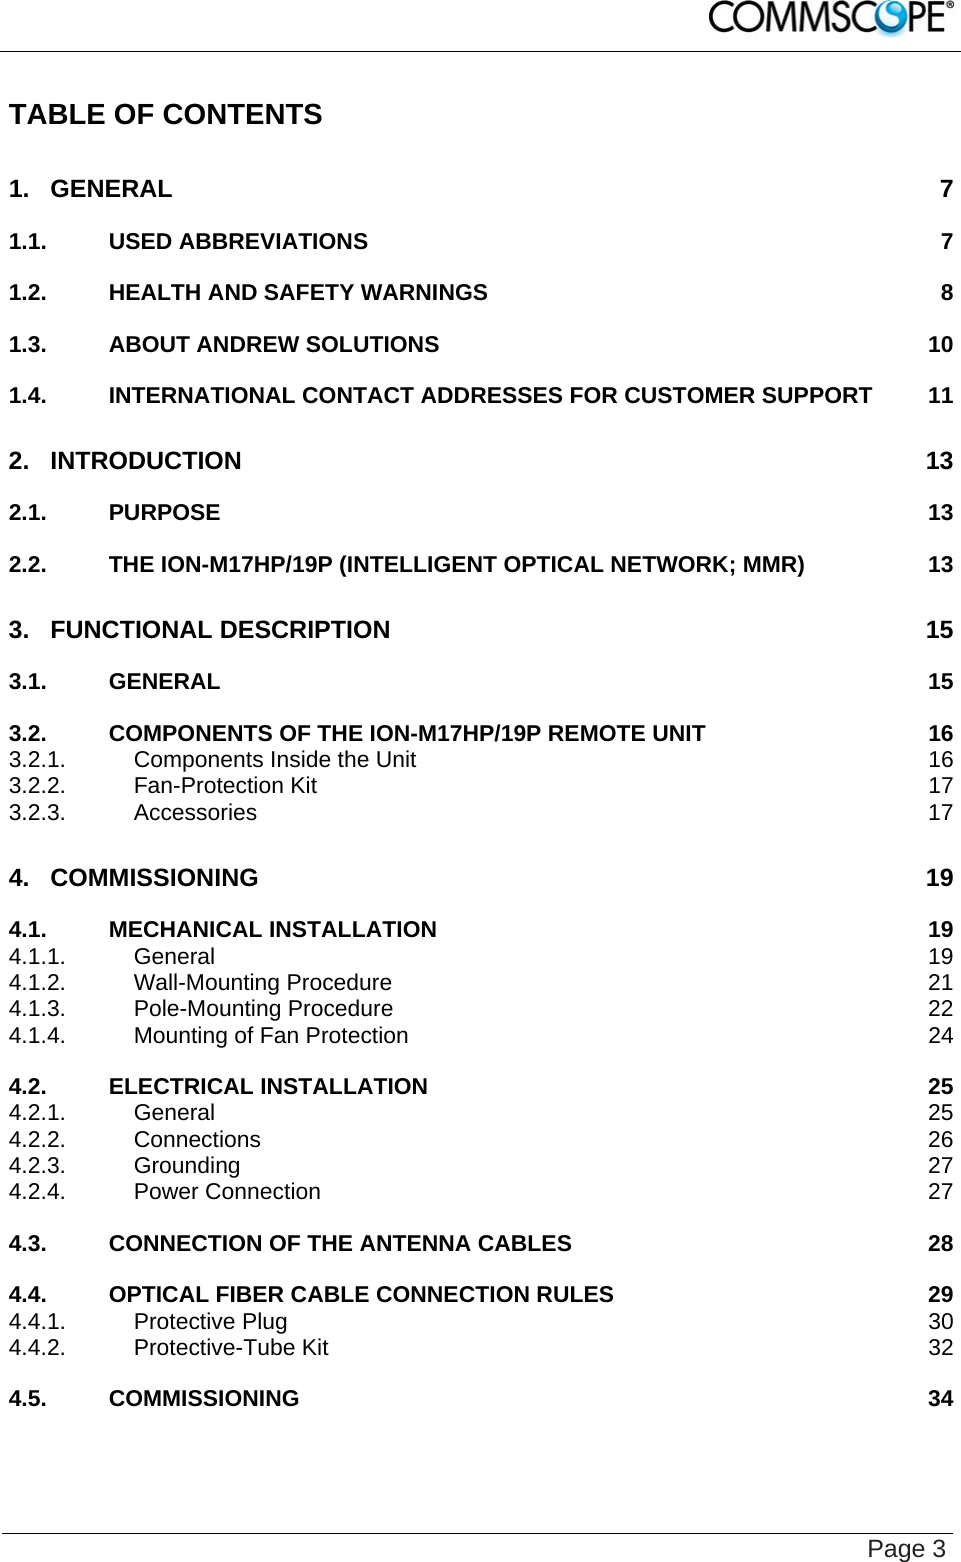    Page 3 TABLE OF CONTENTS 1. GENERAL 7 1.1. USED ABBREVIATIONS  7 1.2. HEALTH AND SAFETY WARNINGS  8 1.3. ABOUT ANDREW SOLUTIONS  10 1.4. INTERNATIONAL CONTACT ADDRESSES FOR CUSTOMER SUPPORT  11 2. INTRODUCTION 13 2.1. PURPOSE 13 2.2. THE ION-M17HP/19P (INTELLIGENT OPTICAL NETWORK; MMR)  13 3. FUNCTIONAL DESCRIPTION  15 3.1. GENERAL 15 3.2. COMPONENTS OF THE ION-M17HP/19P REMOTE UNIT  16 3.2.1. Components Inside the Unit  16 3.2.2. Fan-Protection Kit  17 3.2.3. Accessories 17 4. COMMISSIONING 19 4.1. MECHANICAL INSTALLATION  19 4.1.1. General 19 4.1.2. Wall-Mounting Procedure  21 4.1.3. Pole-Mounting Procedure  22 4.1.4. Mounting of Fan Protection  24 4.2. ELECTRICAL INSTALLATION  25 4.2.1. General 25 4.2.2. Connections 26 4.2.3. Grounding 27 4.2.4. Power Connection  27 4.3. CONNECTION OF THE ANTENNA CABLES  28 4.4. OPTICAL FIBER CABLE CONNECTION RULES  29 4.4.1. Protective Plug  30 4.4.2. Protective-Tube Kit  32 4.5. COMMISSIONING 34 